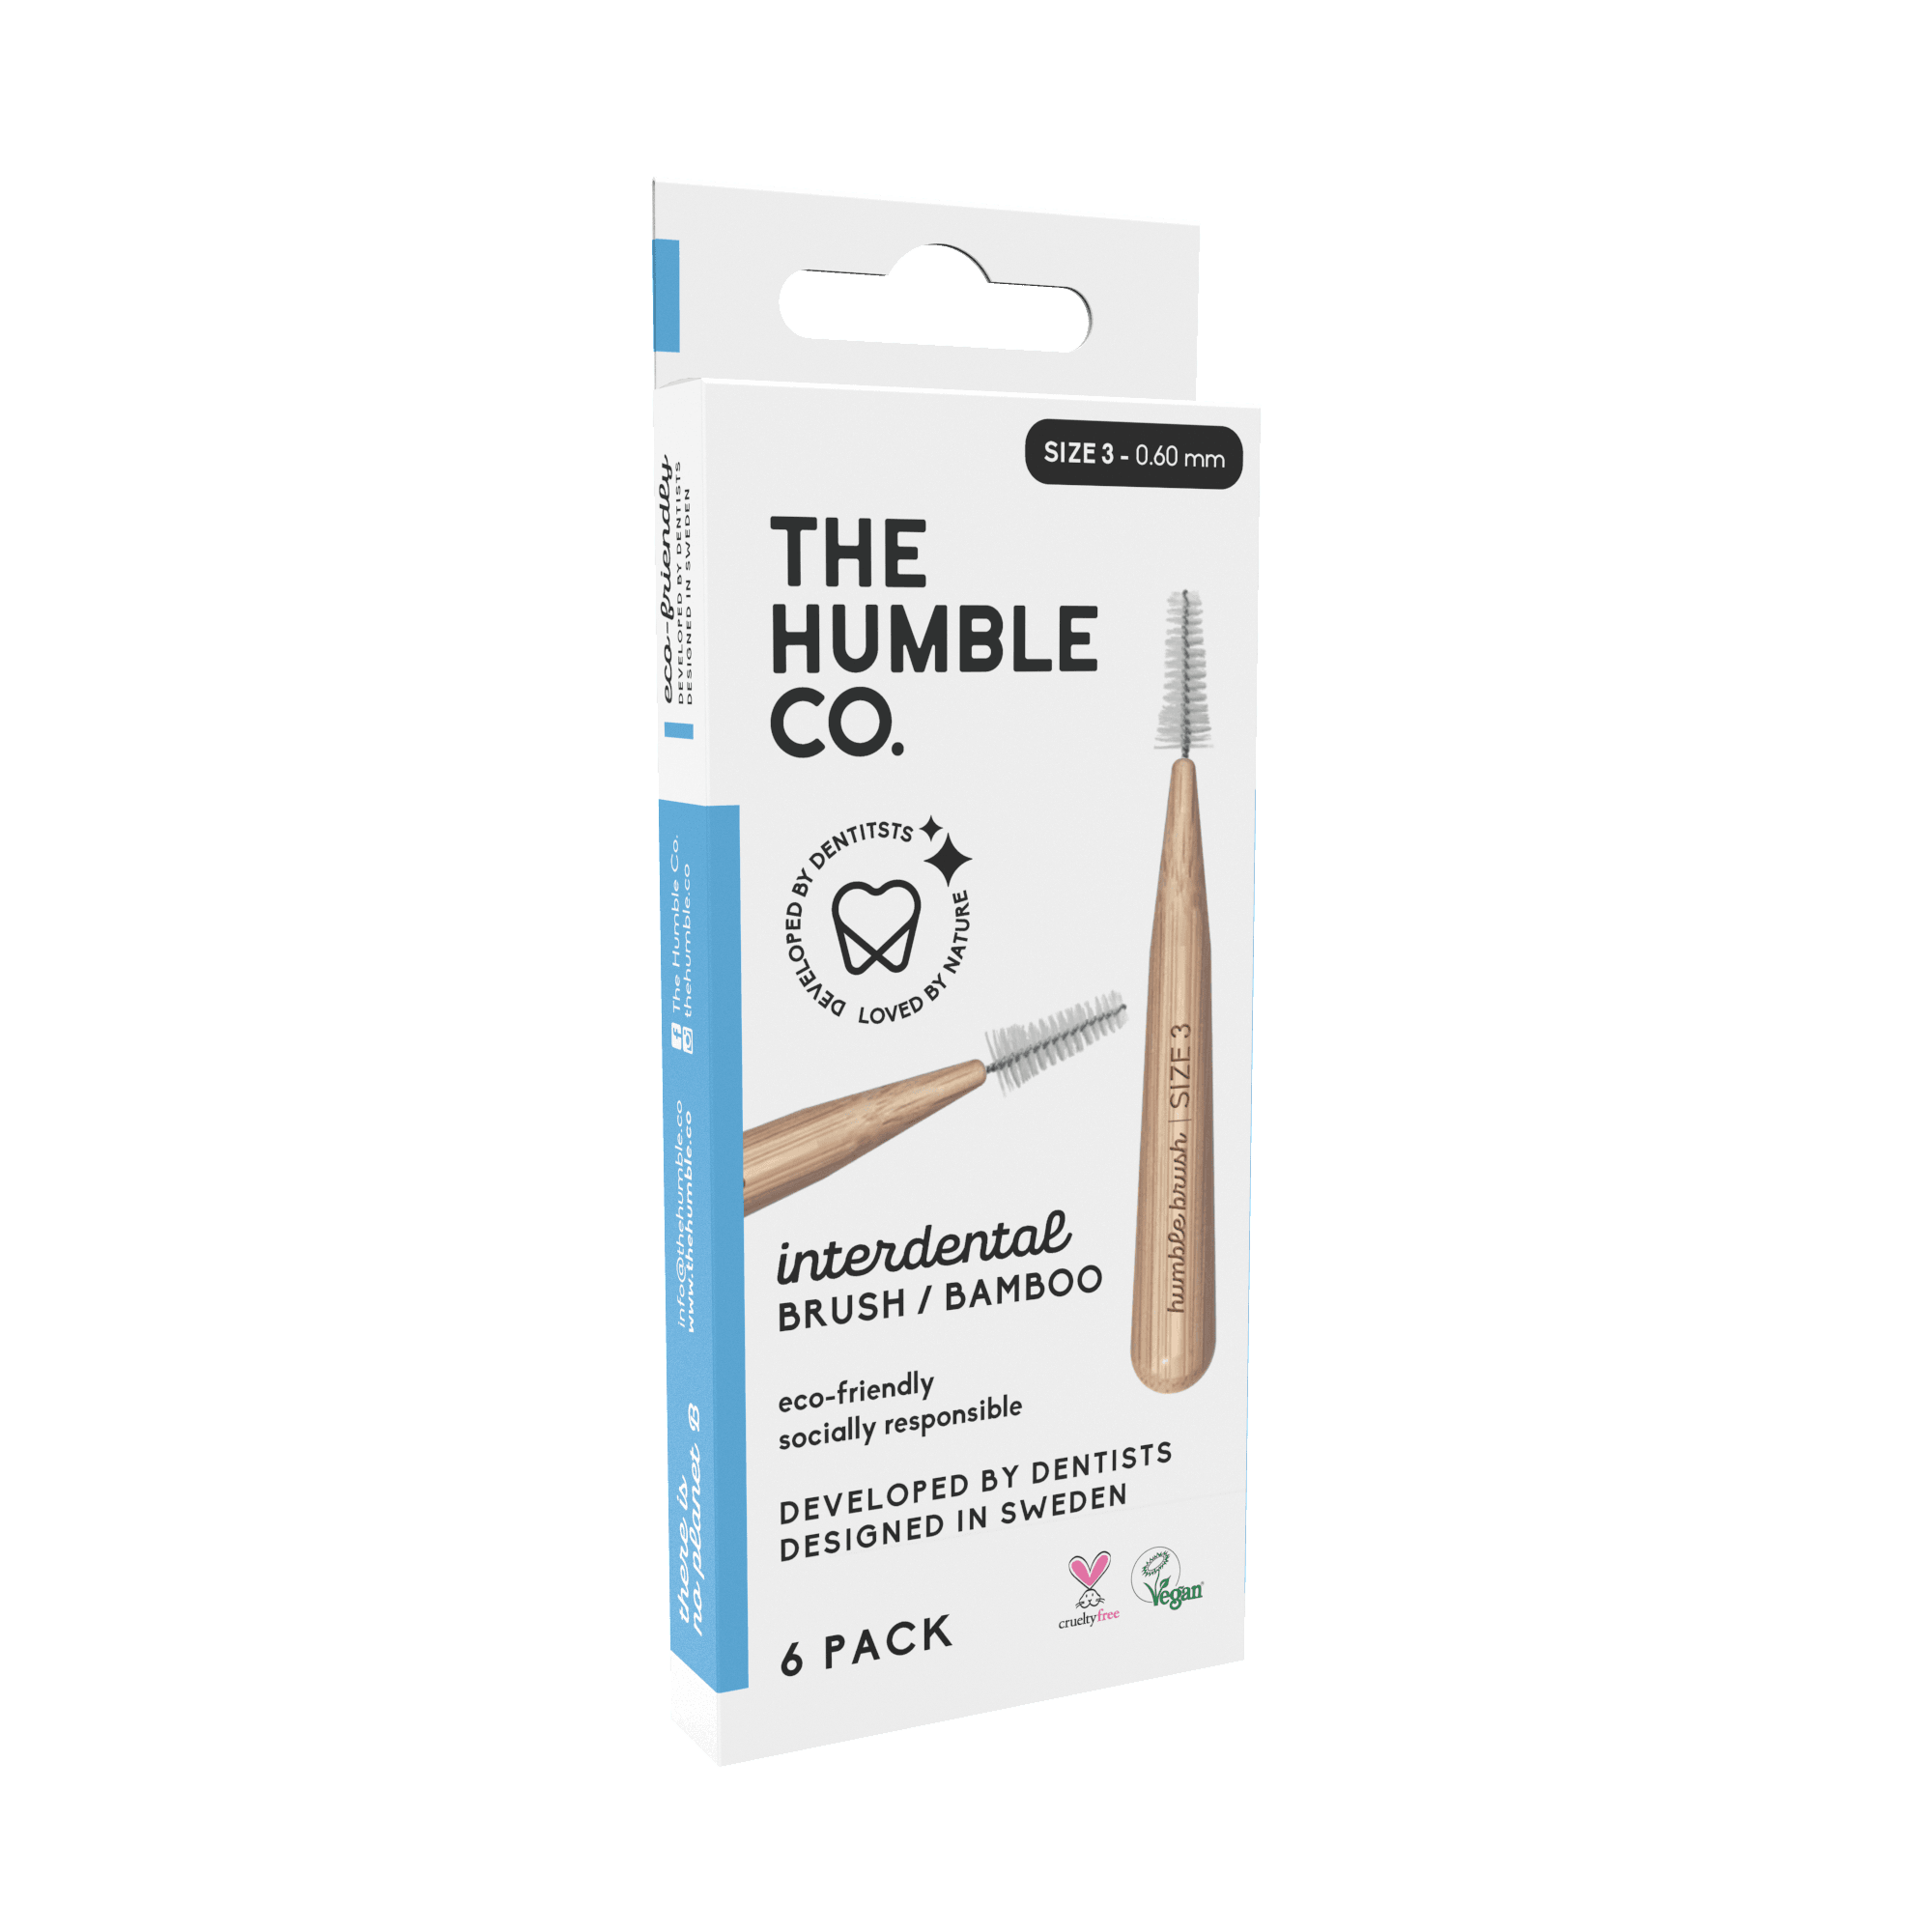 The Humble Co Interdental Brush Bamboo - Size 3